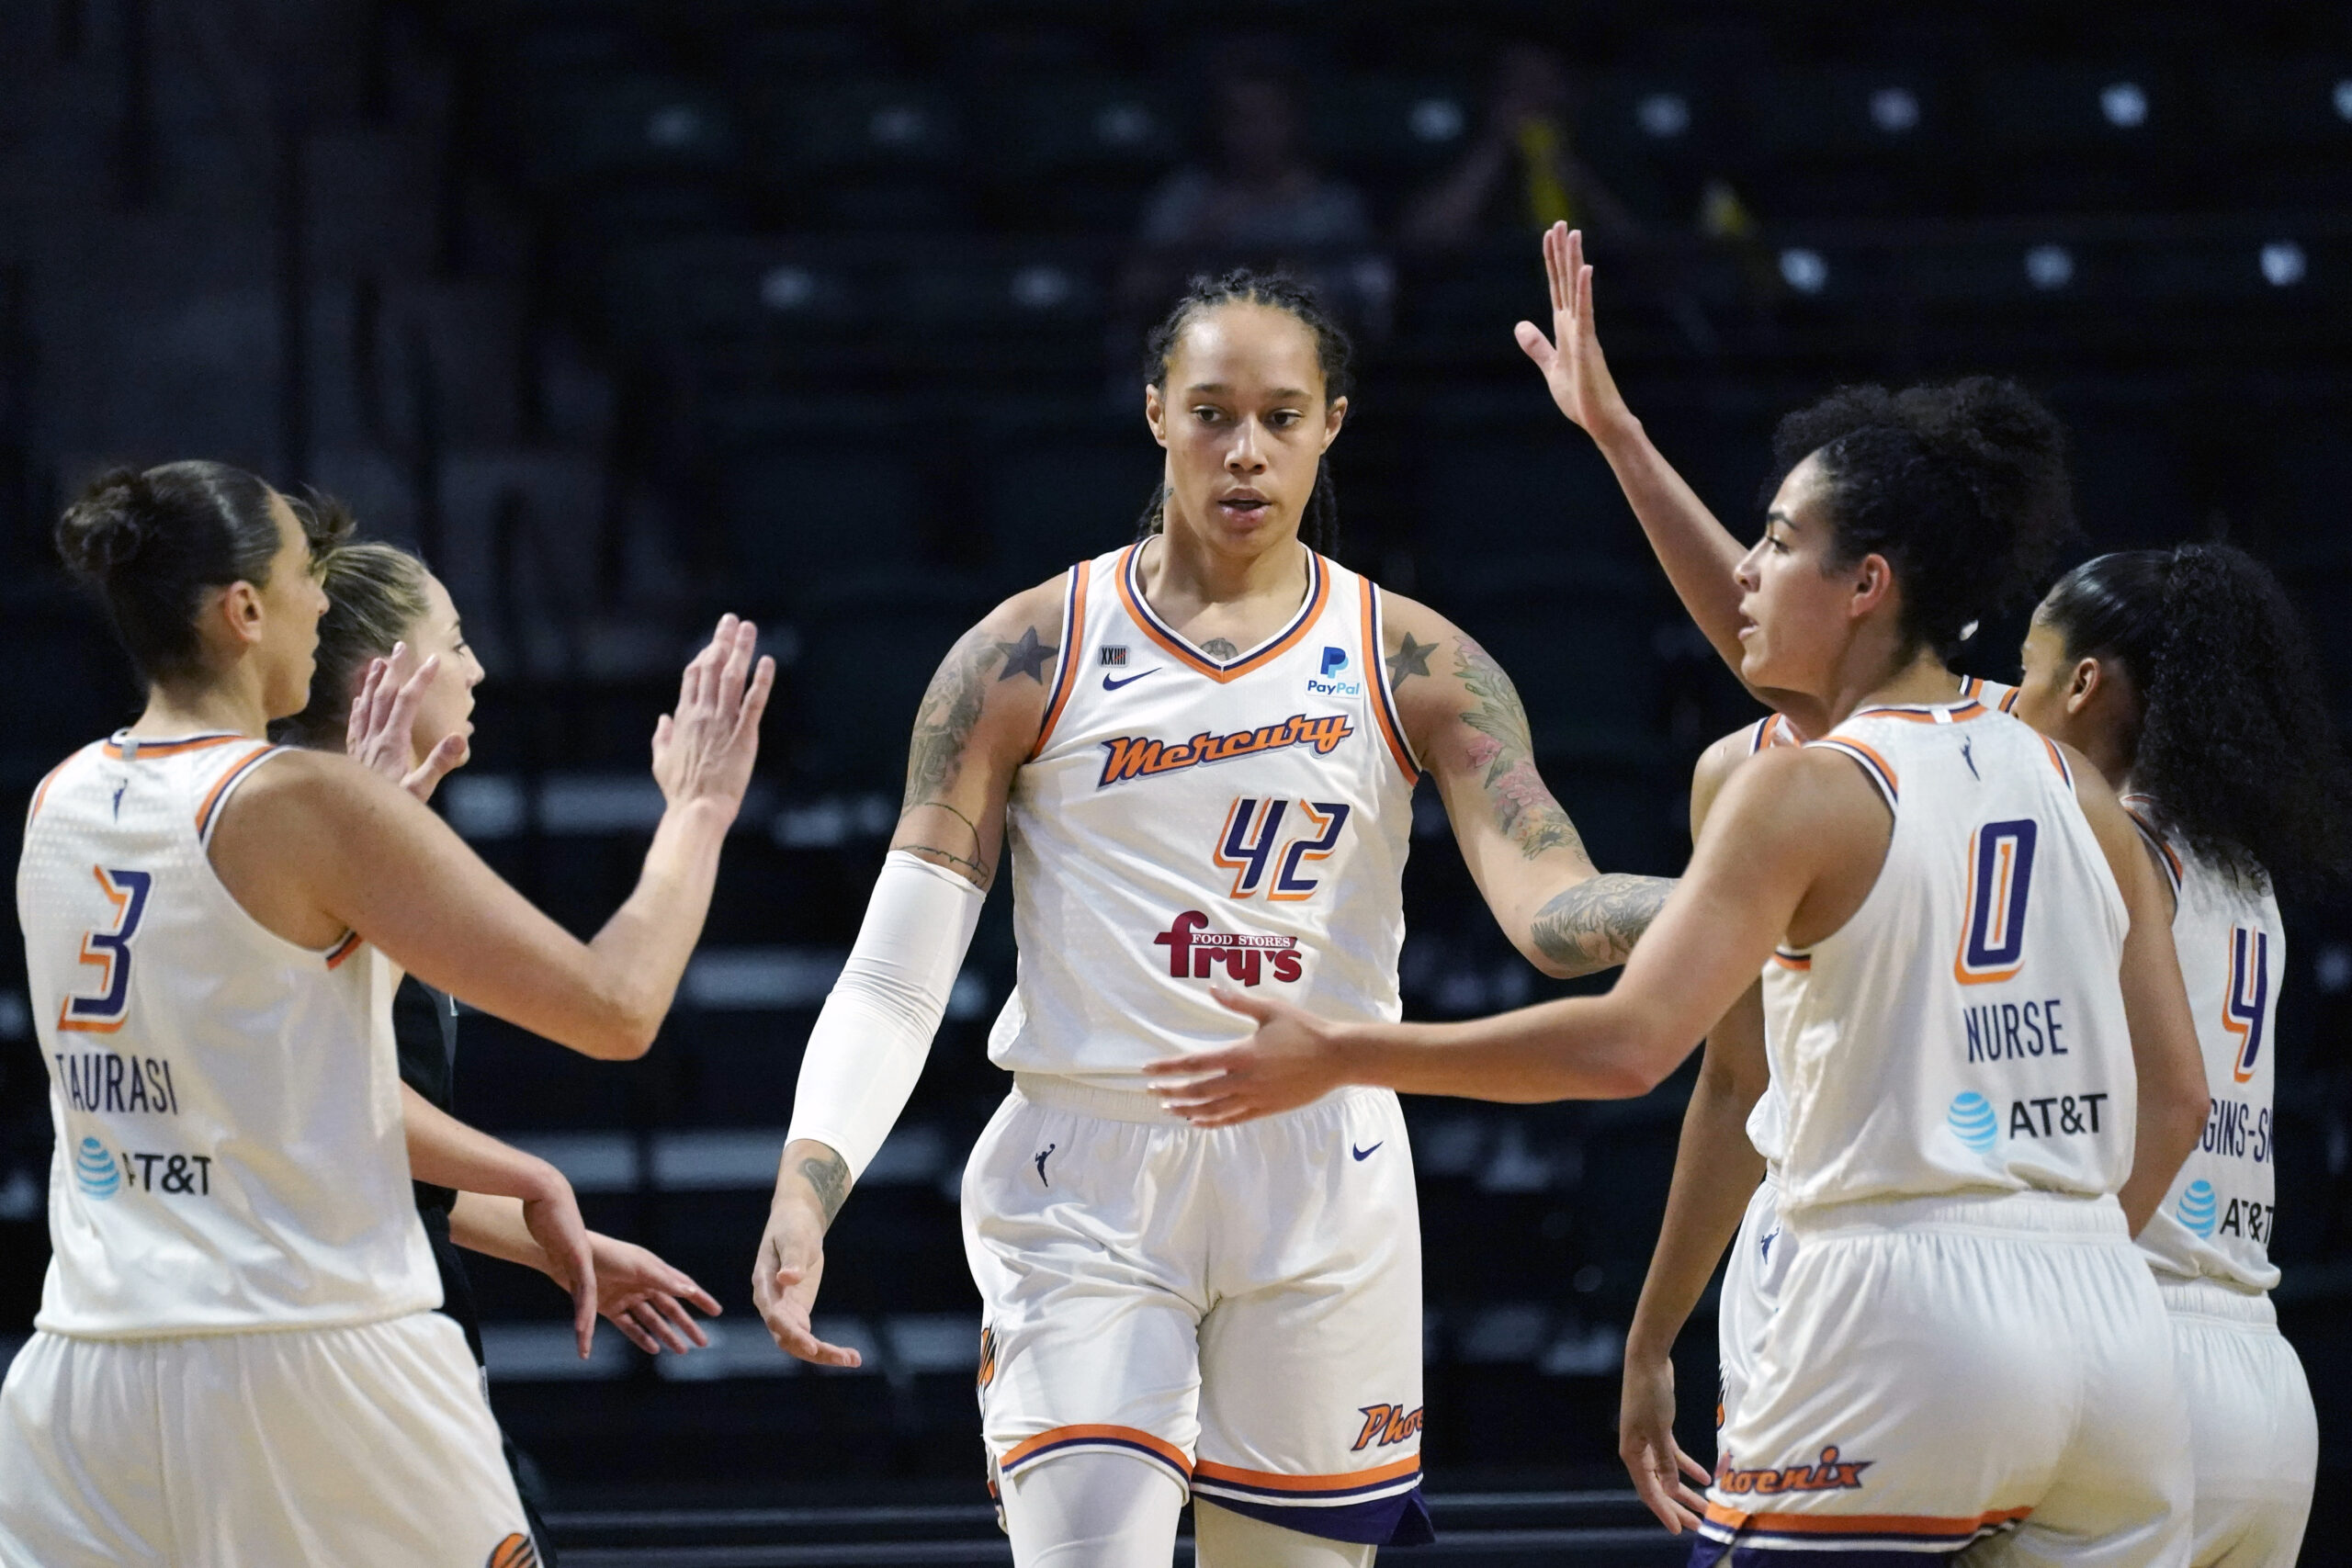 Brittney Griner, formerly of the Phoenix Mercury, is congratulated on a play against the Seattle Storm in the first half of the second round of the WNBA basketball playoffs Sunday, Sept. 26, 2021, in Everett, Washington. Griner, who was a free agent, re-signed with the Mercury on a one-year contract according to a person familiar with the deal. The person spoke to The Associated Press on condition of anonymity on Saturday, Feb. 18, 2023. Photo credit: Elaine Thompson, The Associated Press